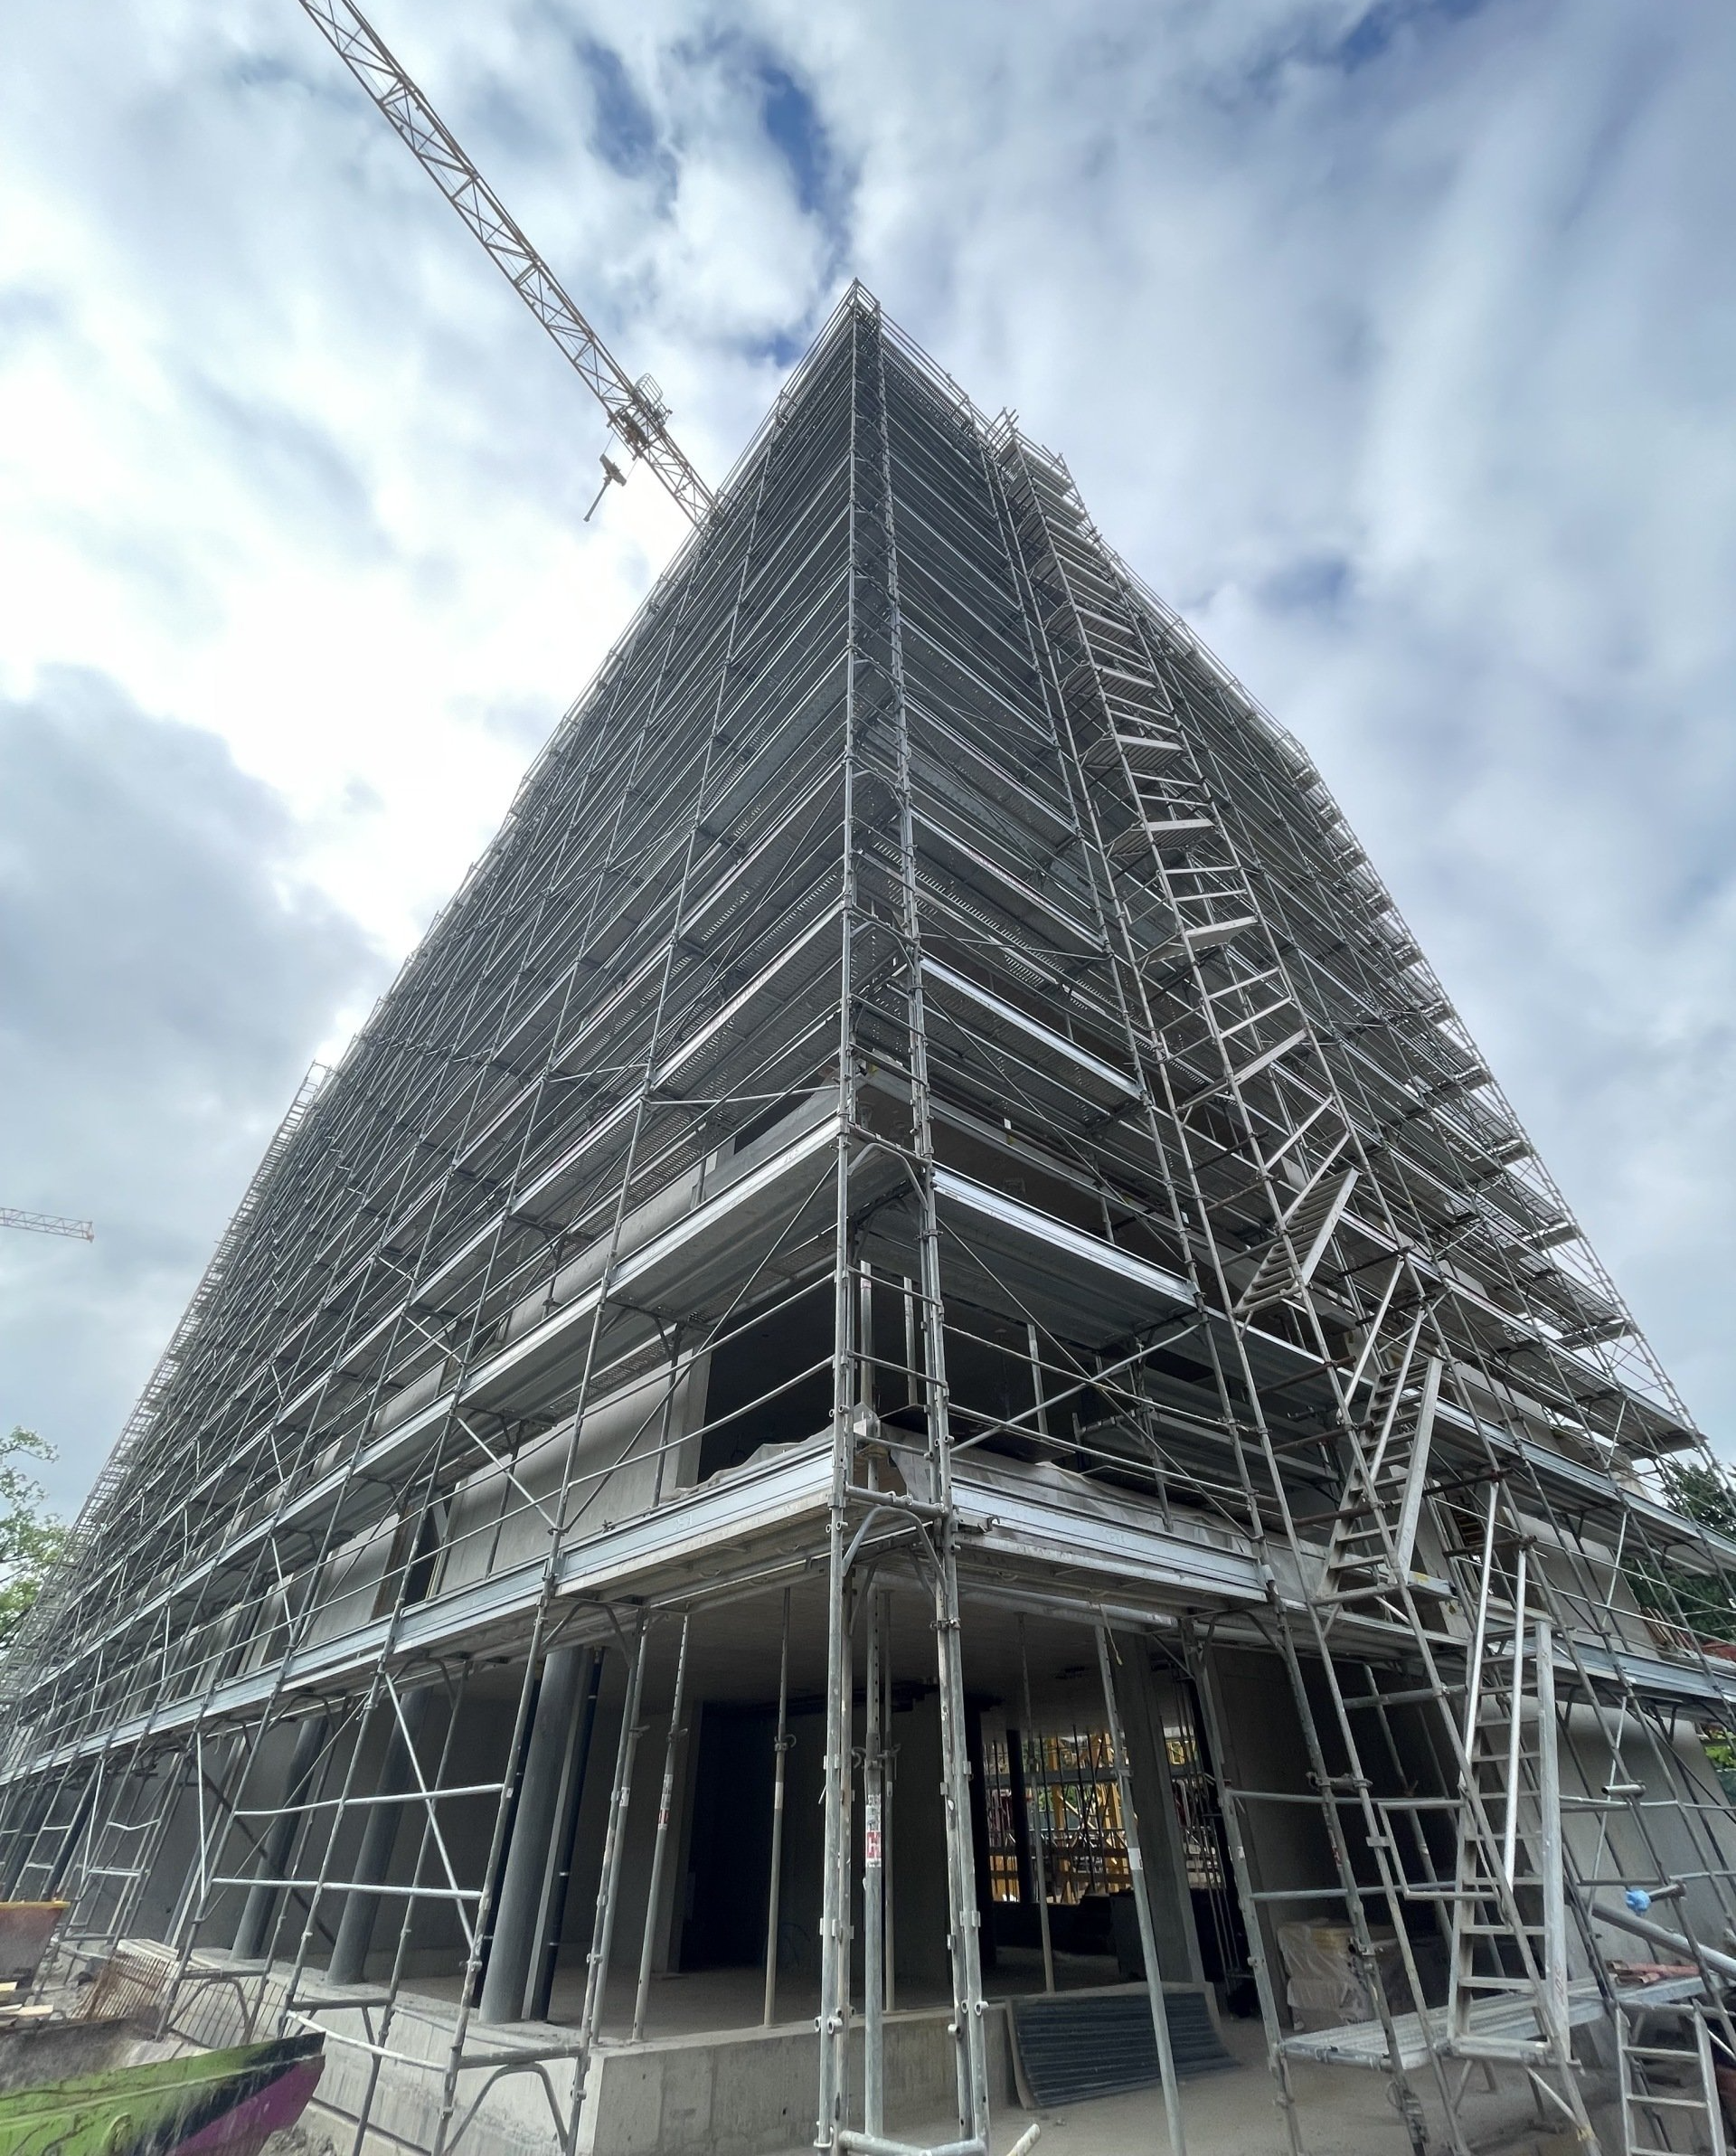 complete scaffolding of a building